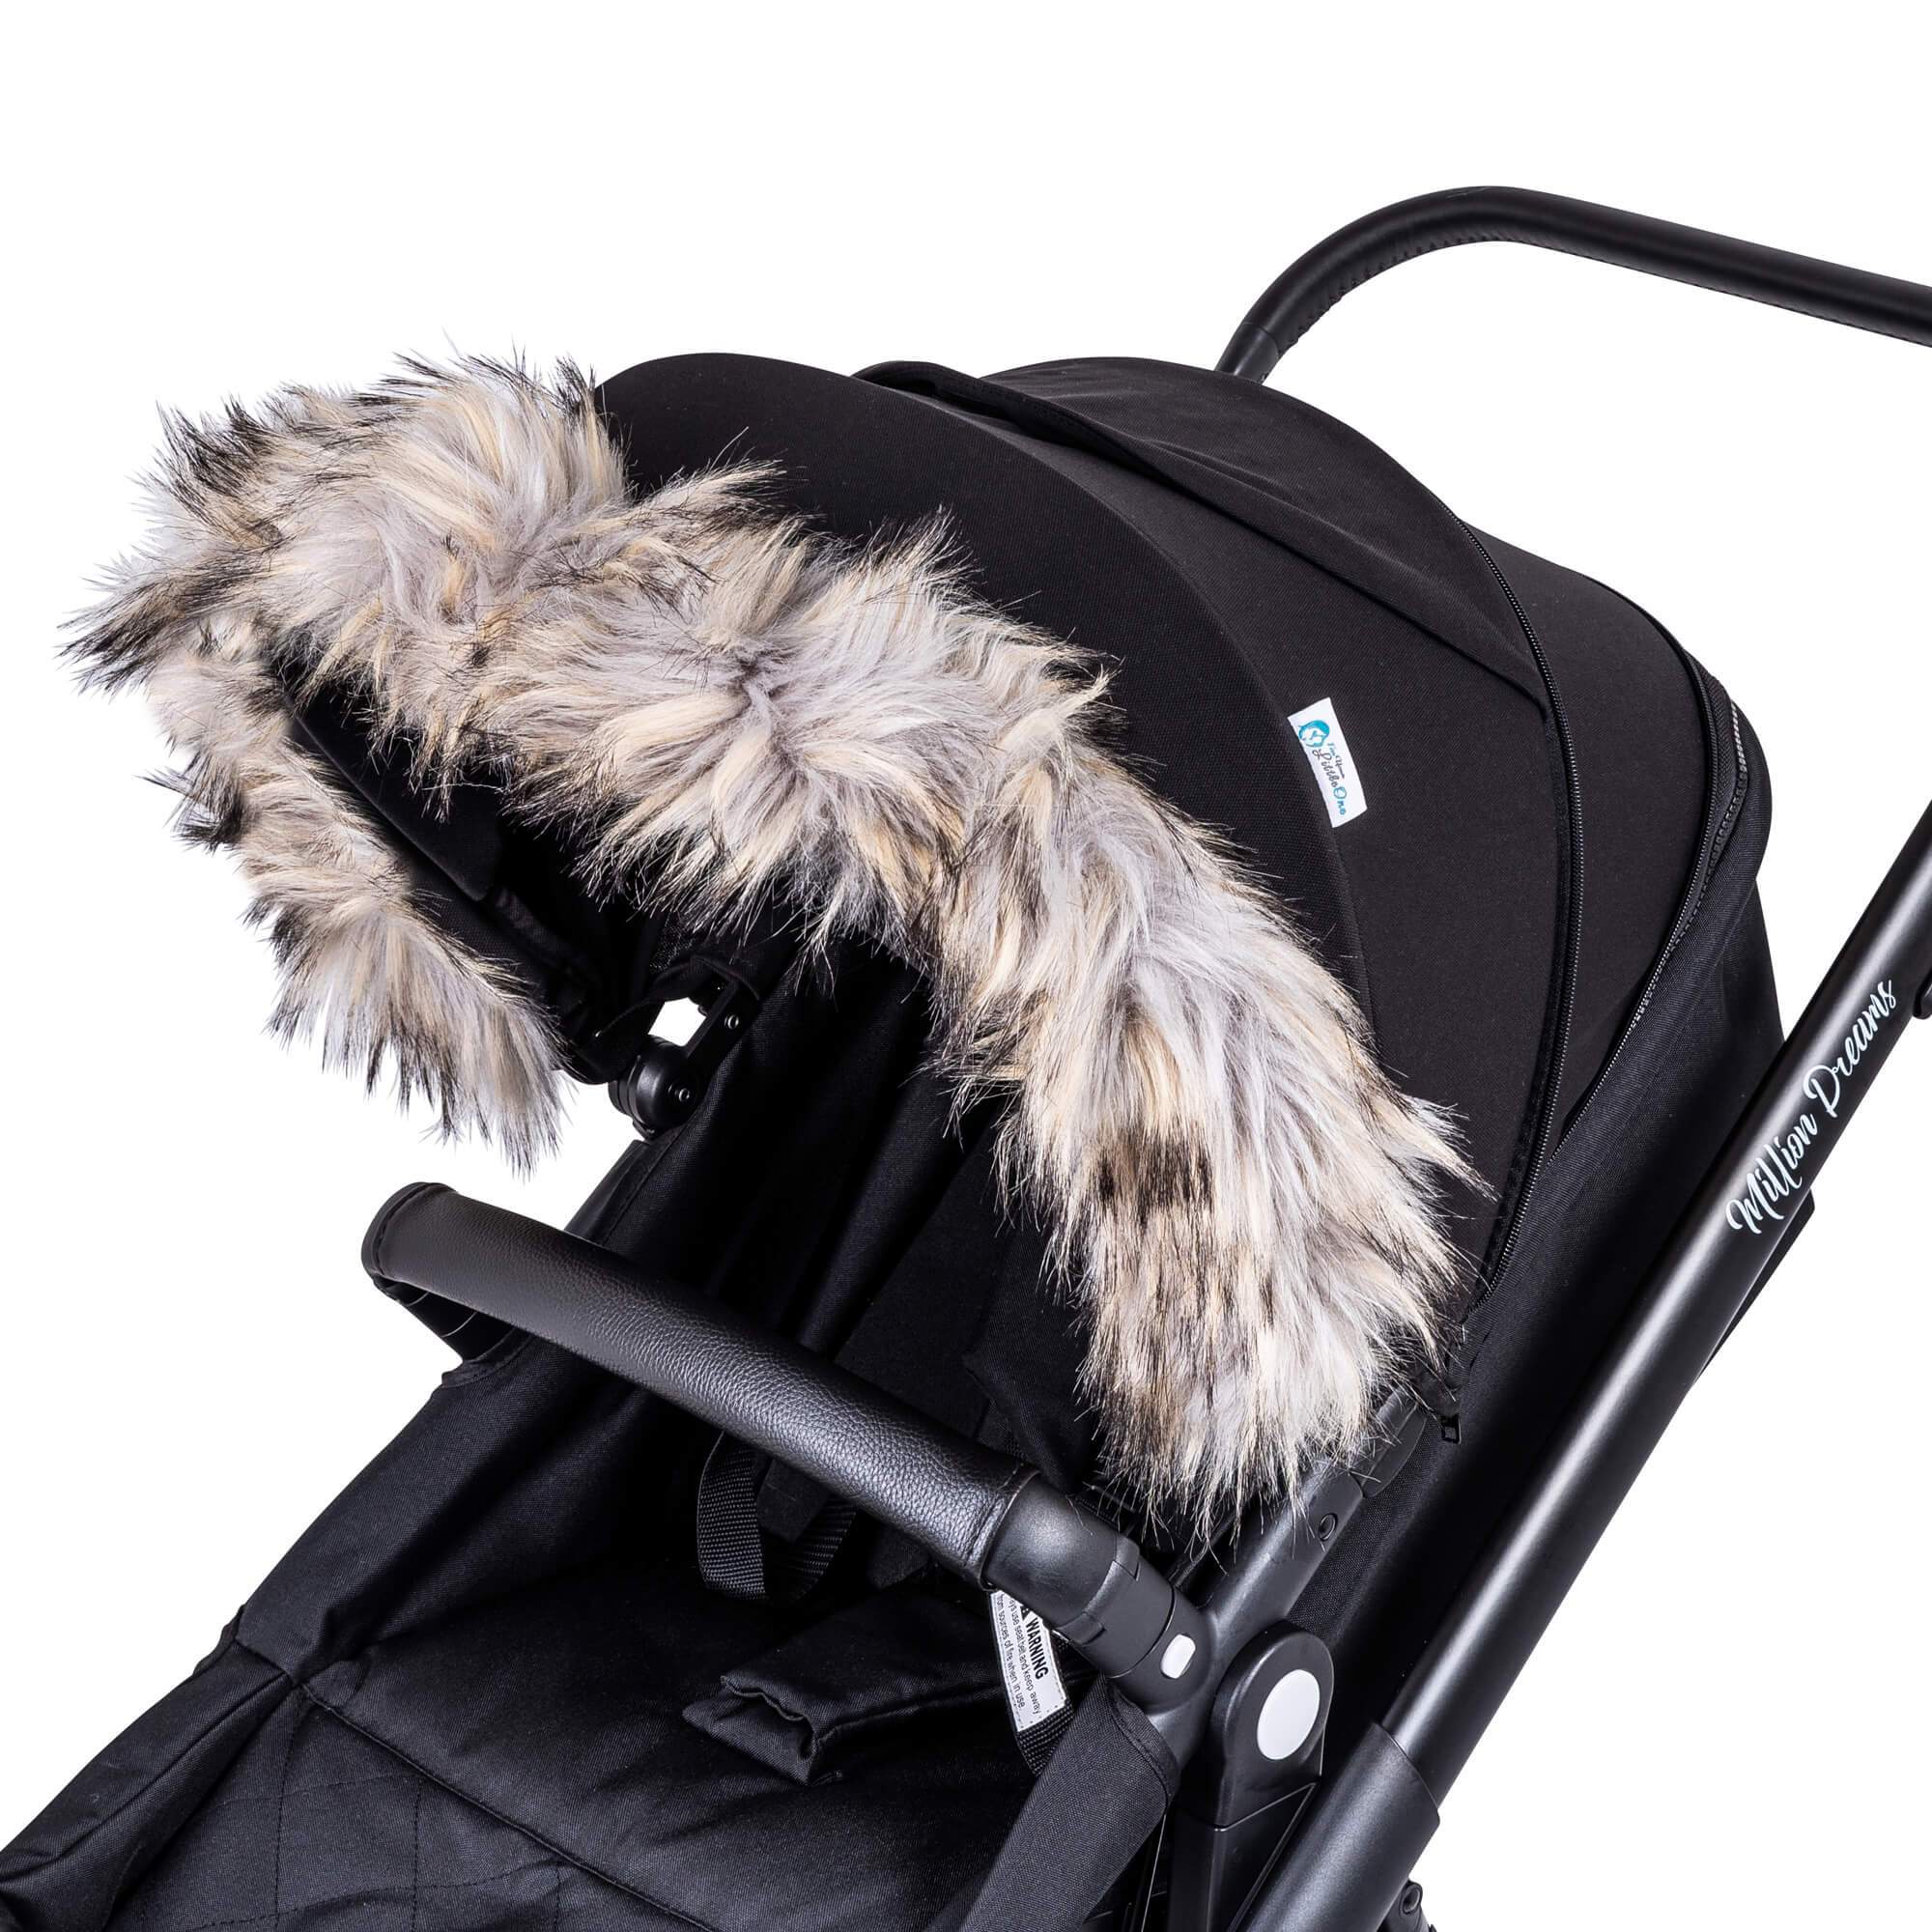 Pram Fur Hood Trim Attachment for Pushchair Compatible with Maxi Cosi - For Your Little One